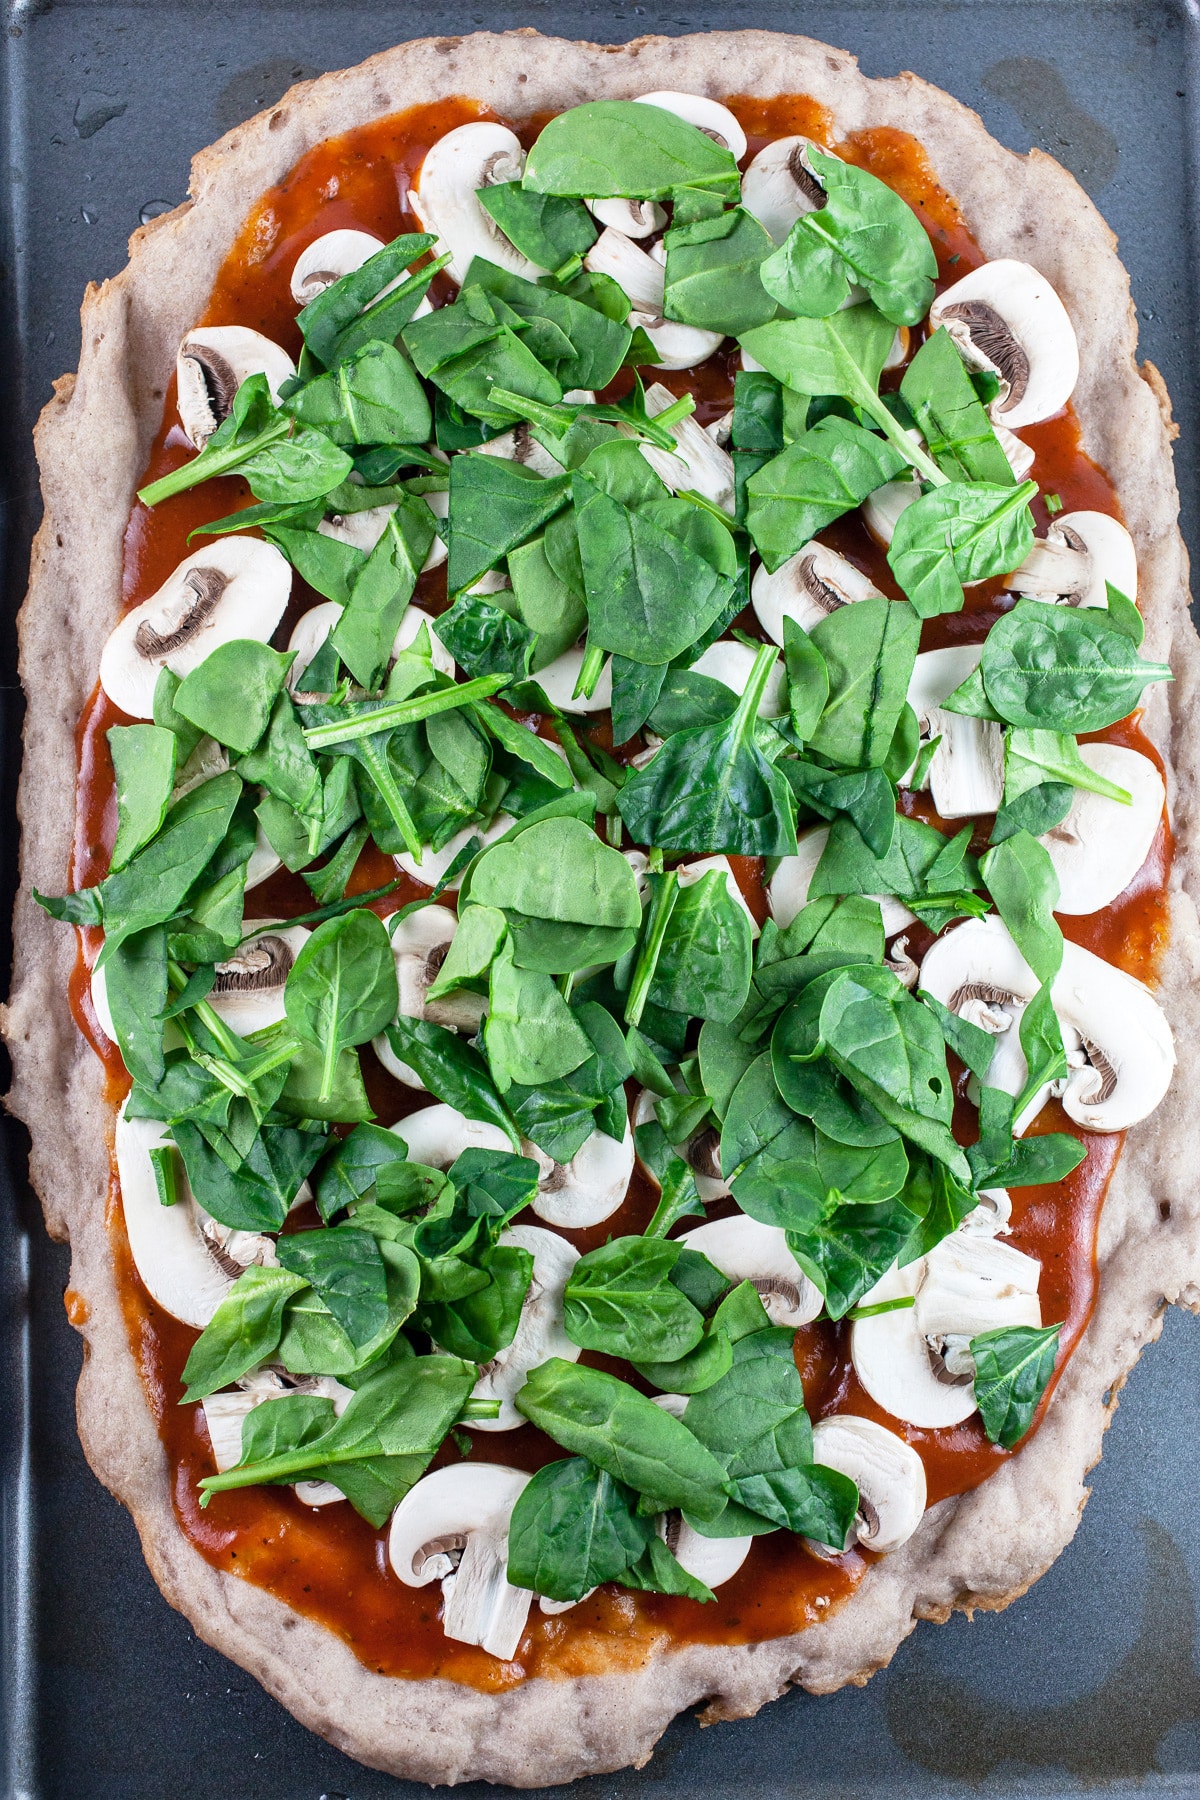 Pizza crust with BBQ sauce, sliced mushrooms, and spinach on baking sheet.